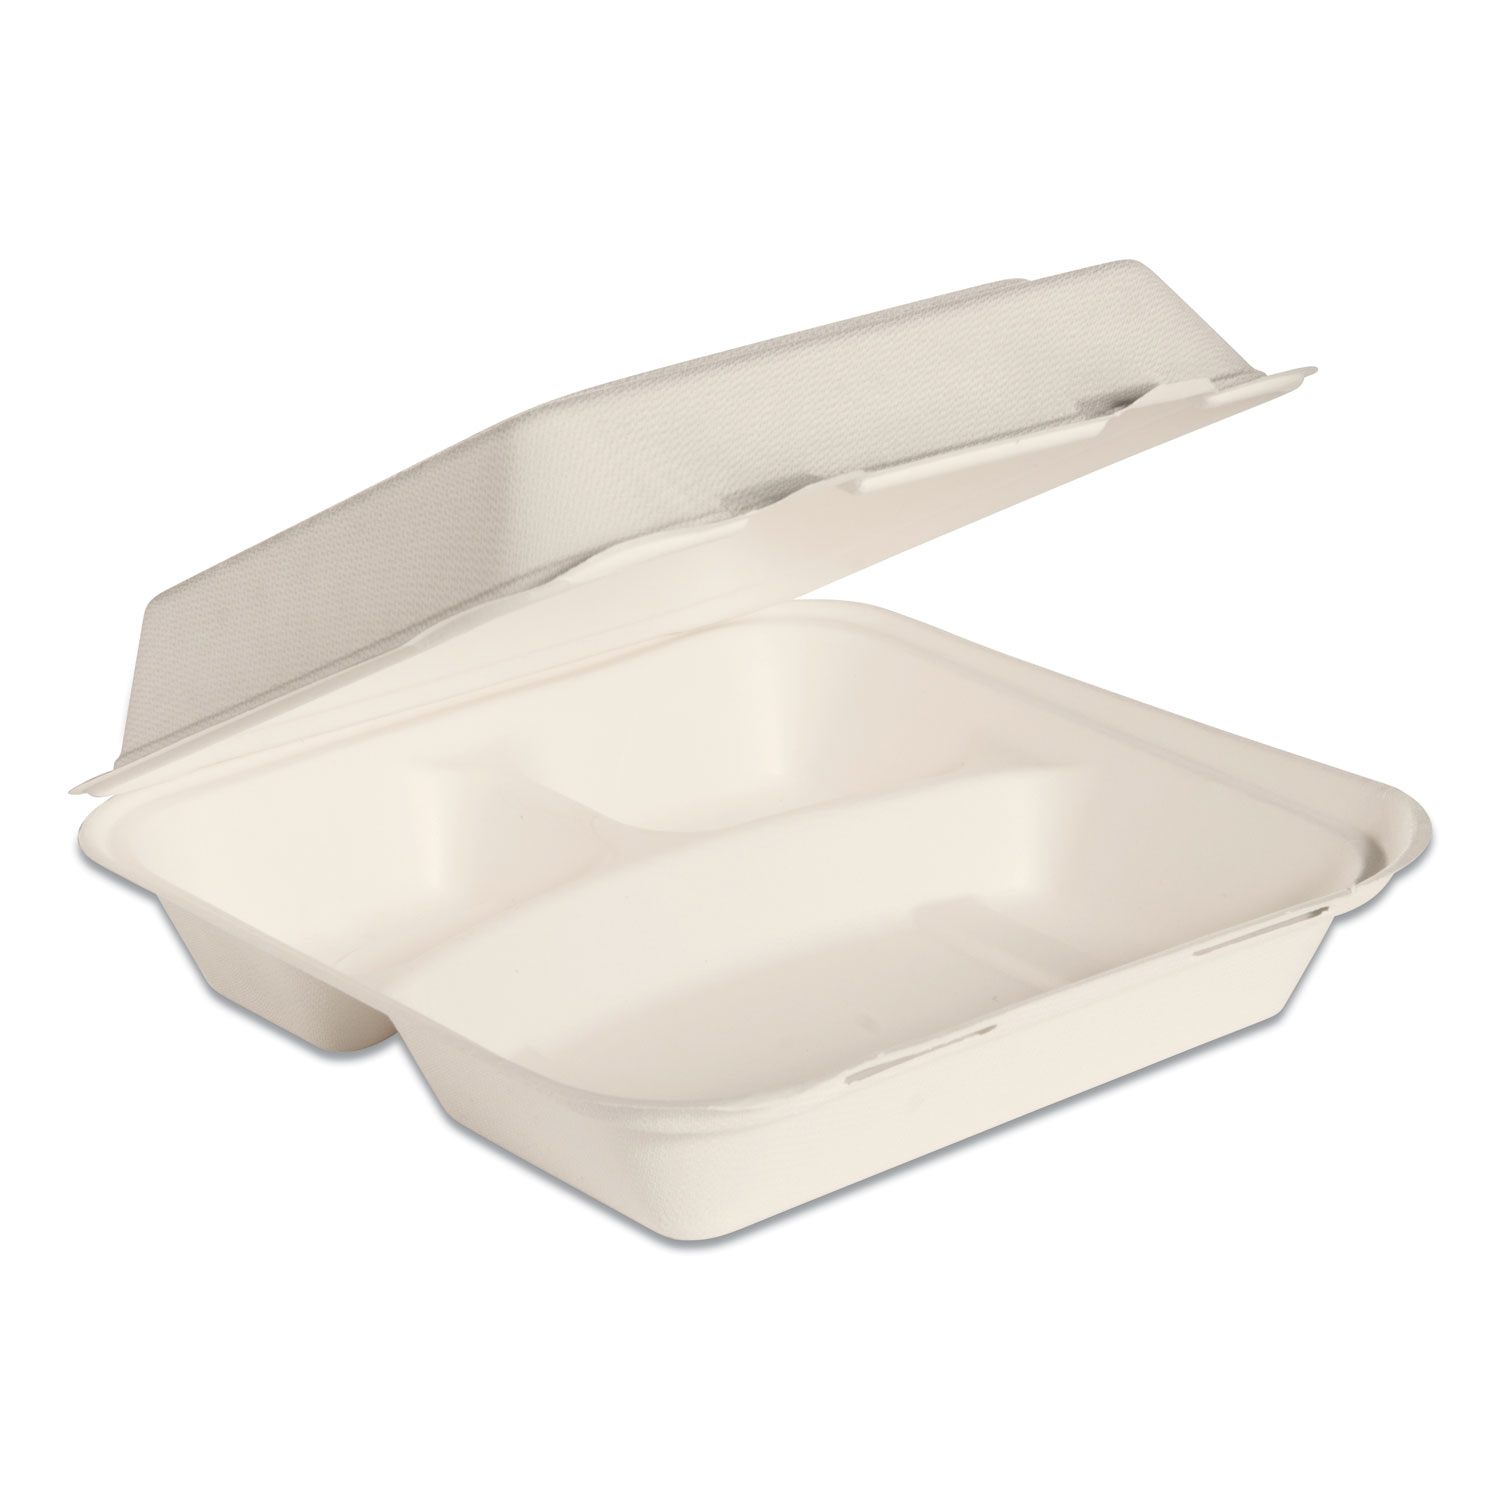  Dart HC9CSC-2050 Bare by Solo Eco-Forward Bagasse Hinged Lid Containers, 3-Compartment, 9.6 x 9.4 x 3.2, Ivory, 200/Carton (SCCHC9CSC2050) 